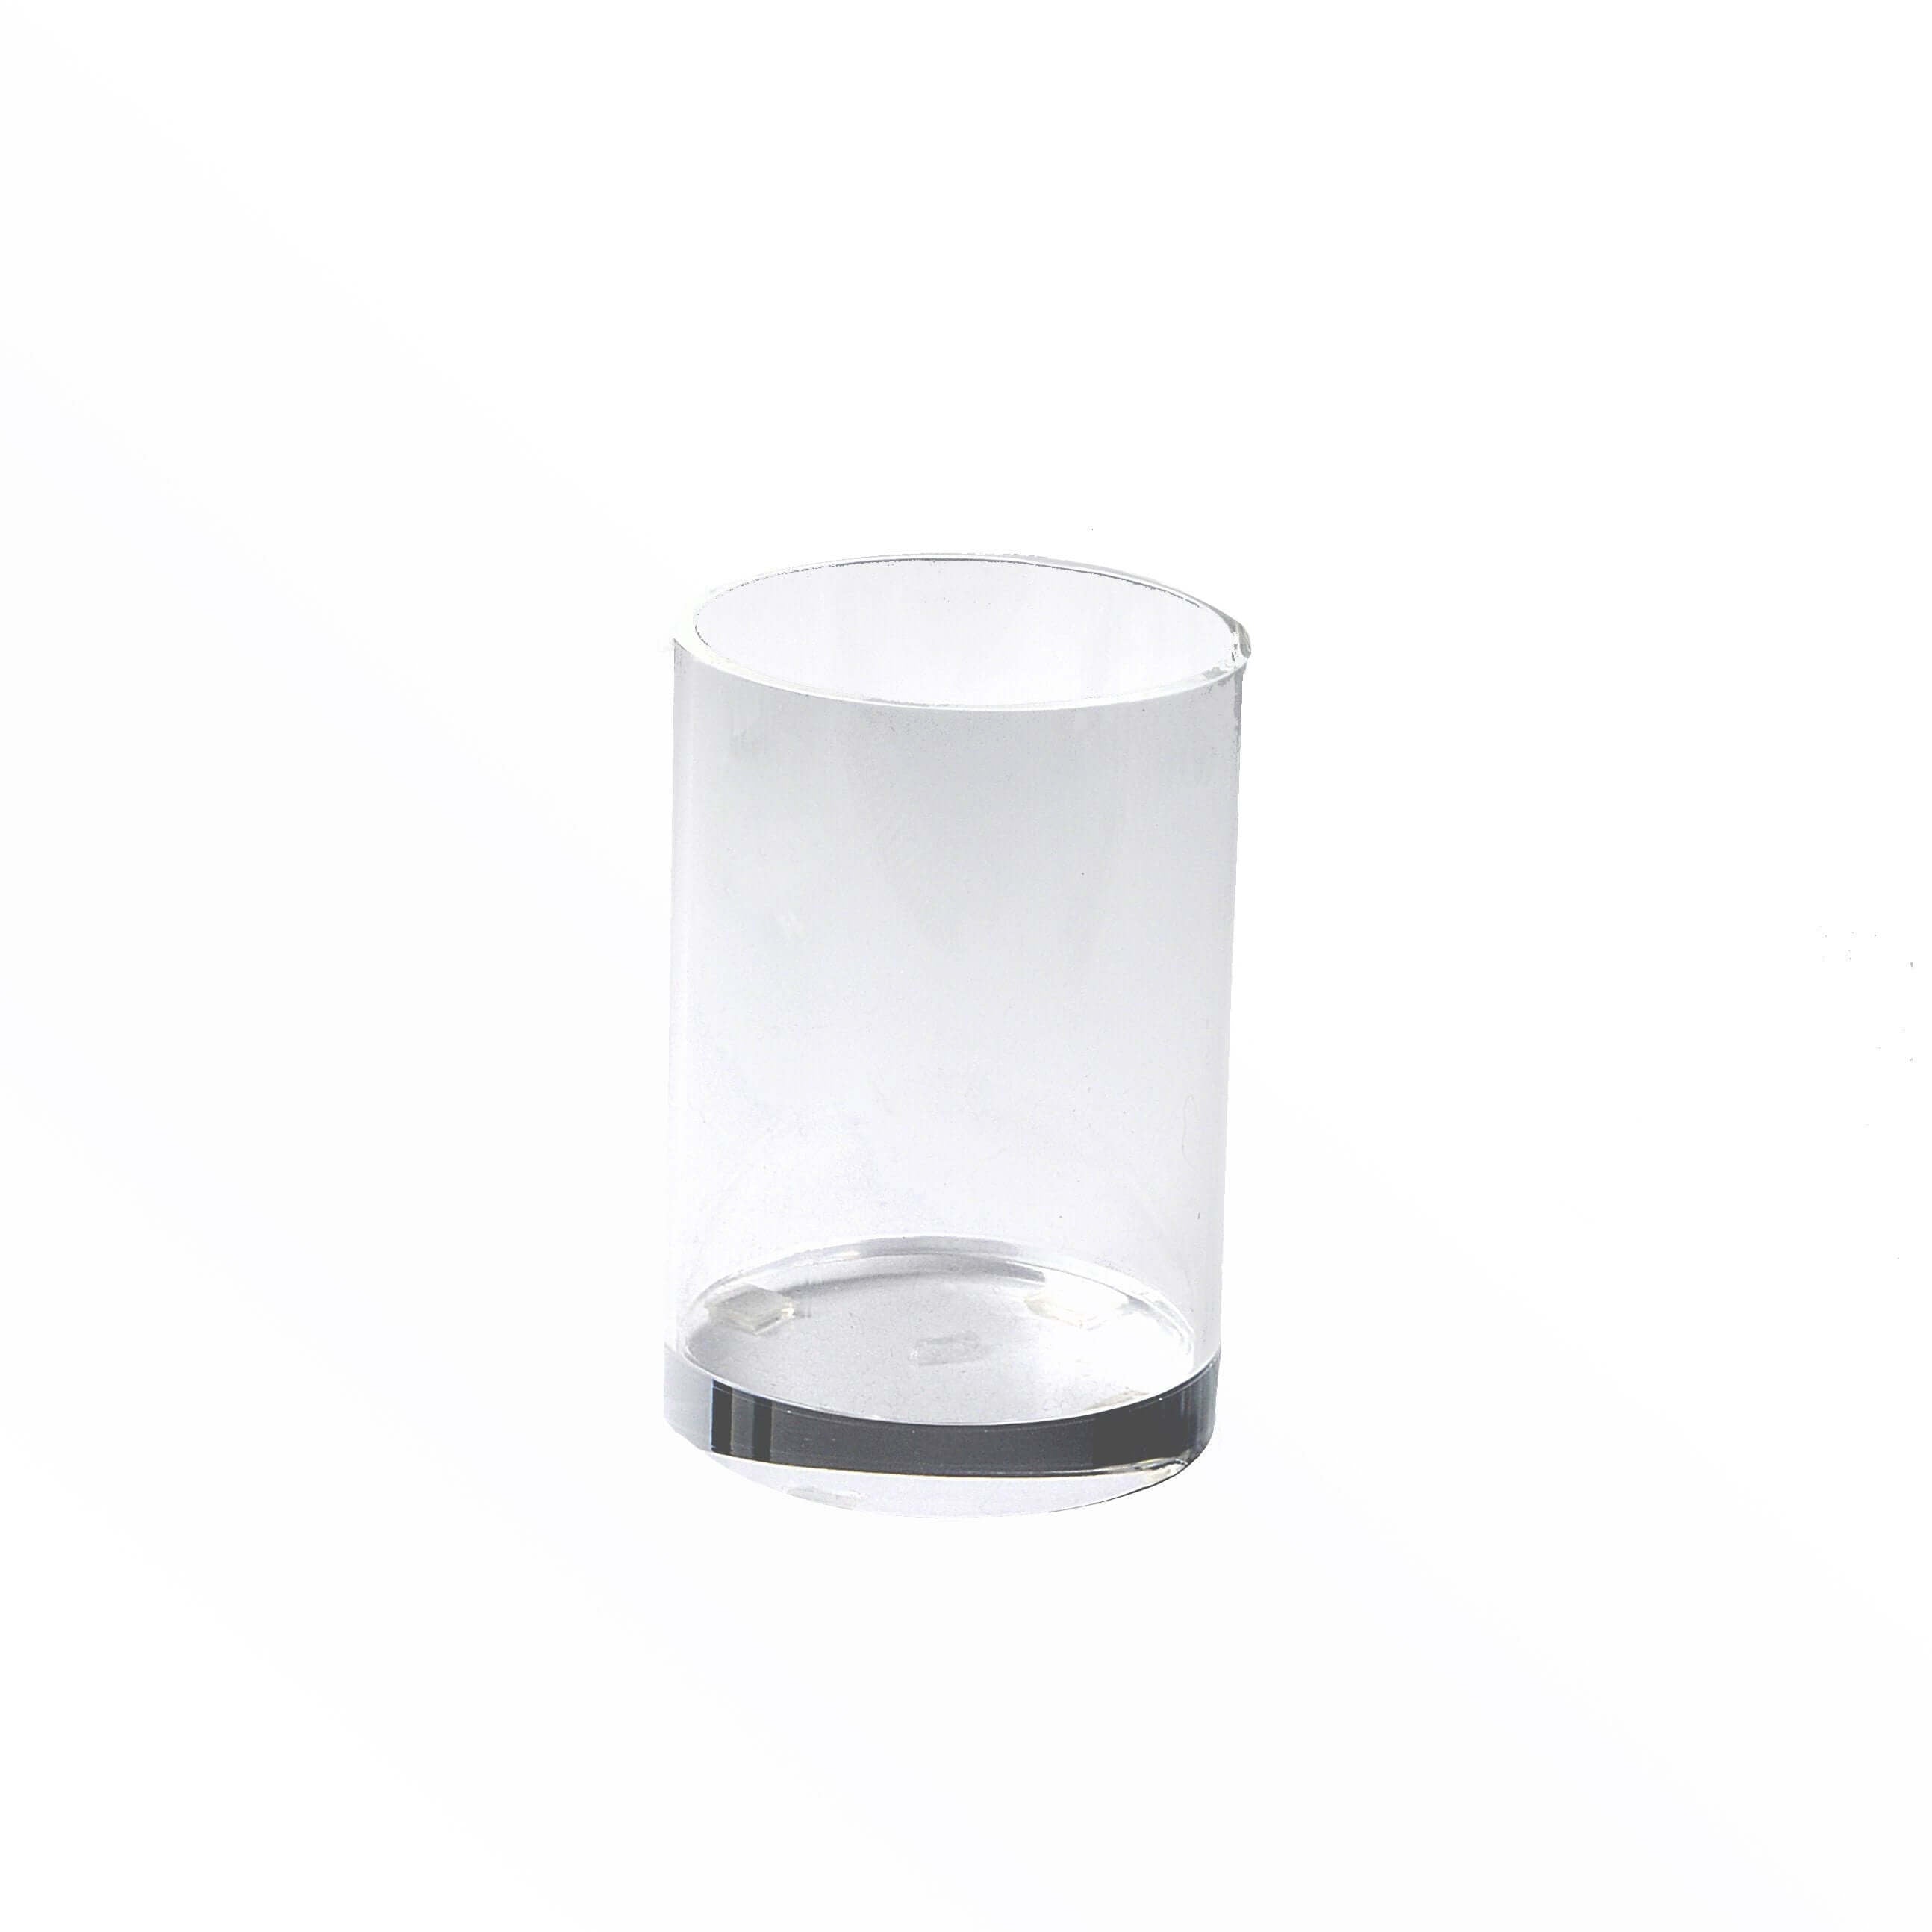 Mike + Ally - Ice Clear Tumbler - 31371 - Clear - 